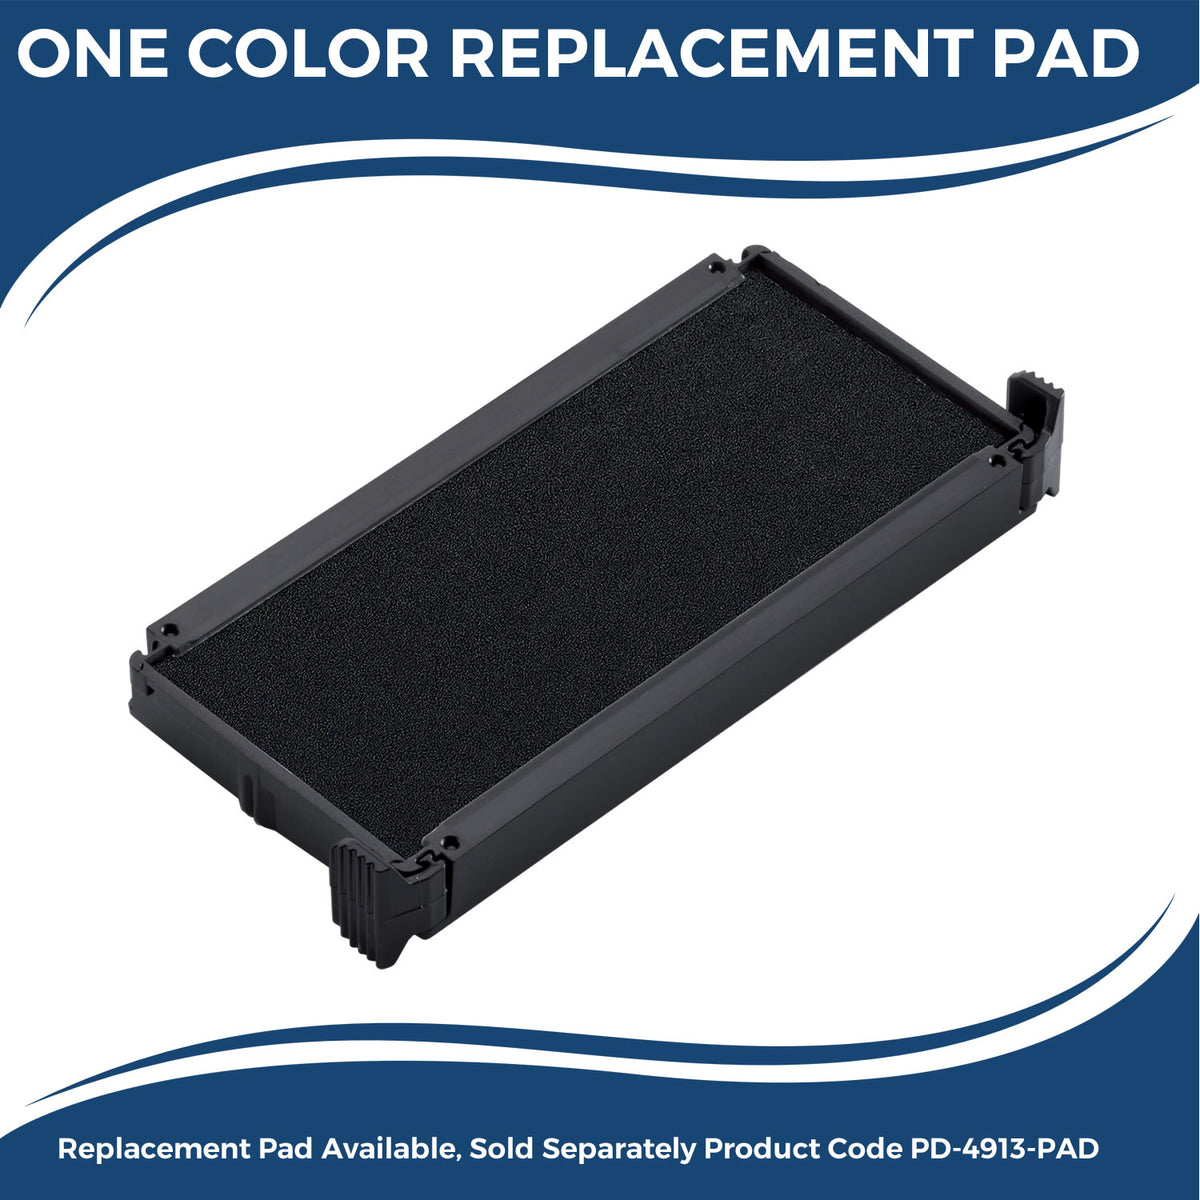 Large Self Inking Copy Stamp 4114S Large Replacment Pad